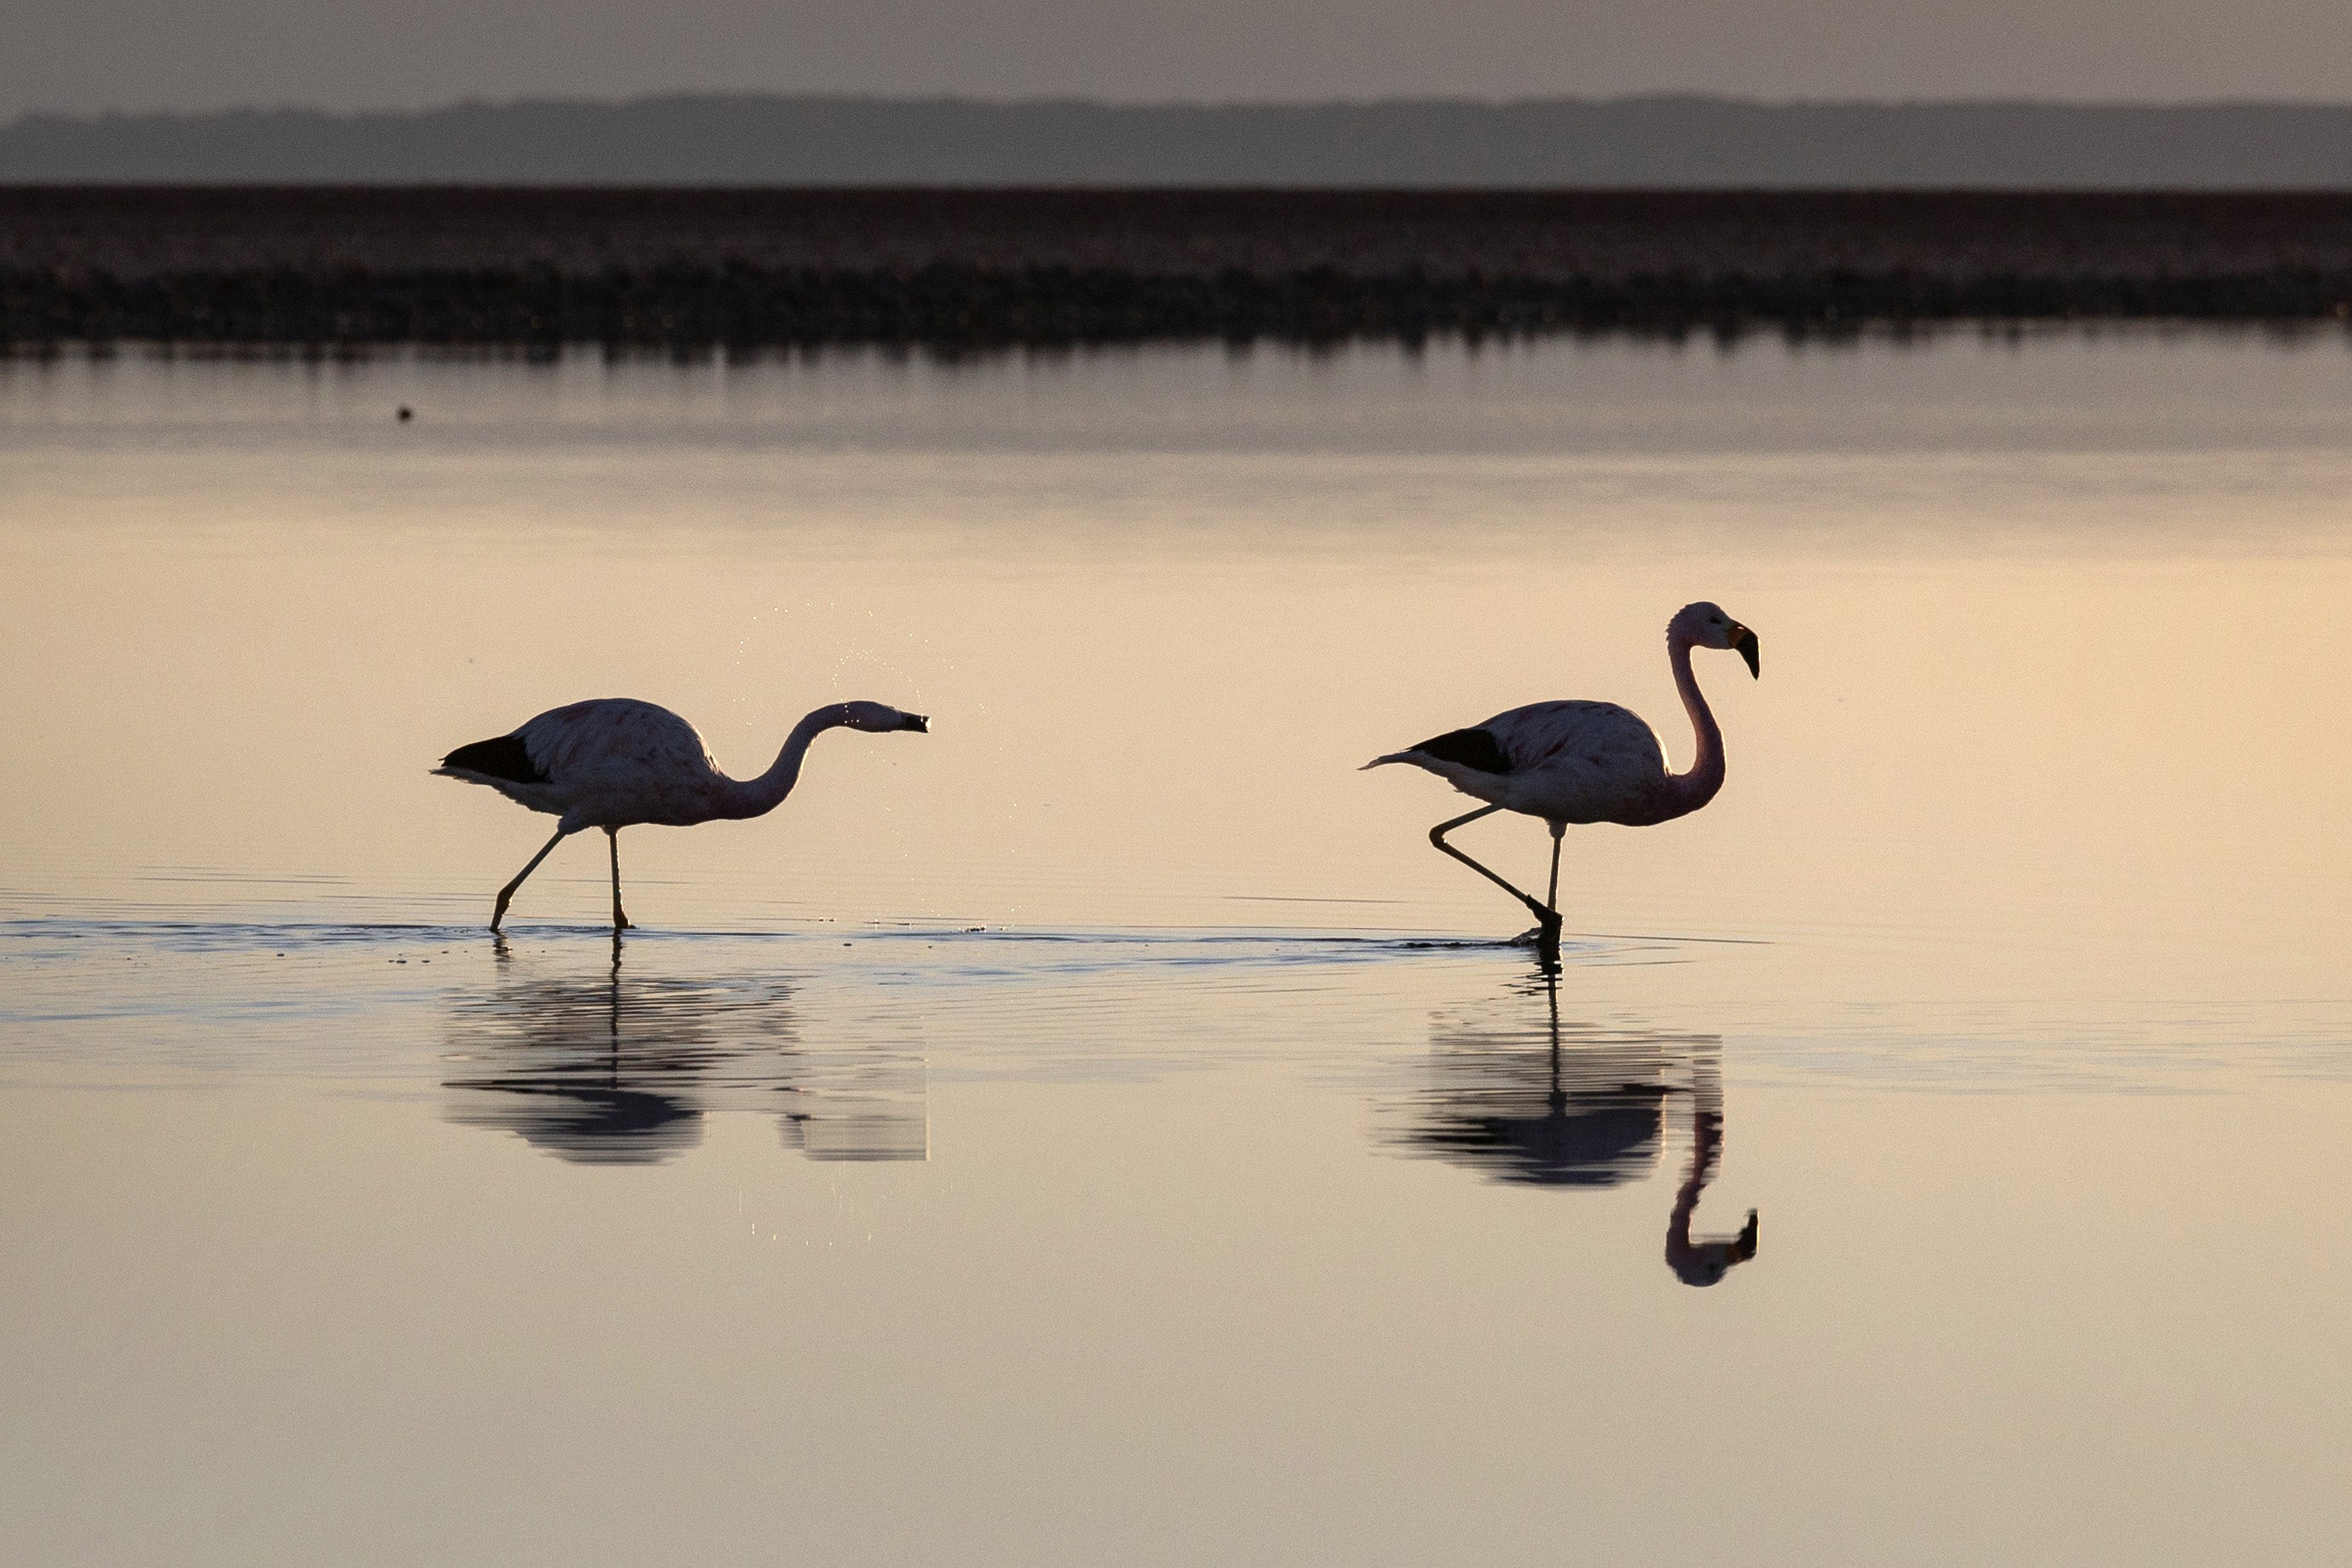 Flamingos are crucial to the local economy and ecosystems. (Photo: John Moore, Getty Images)